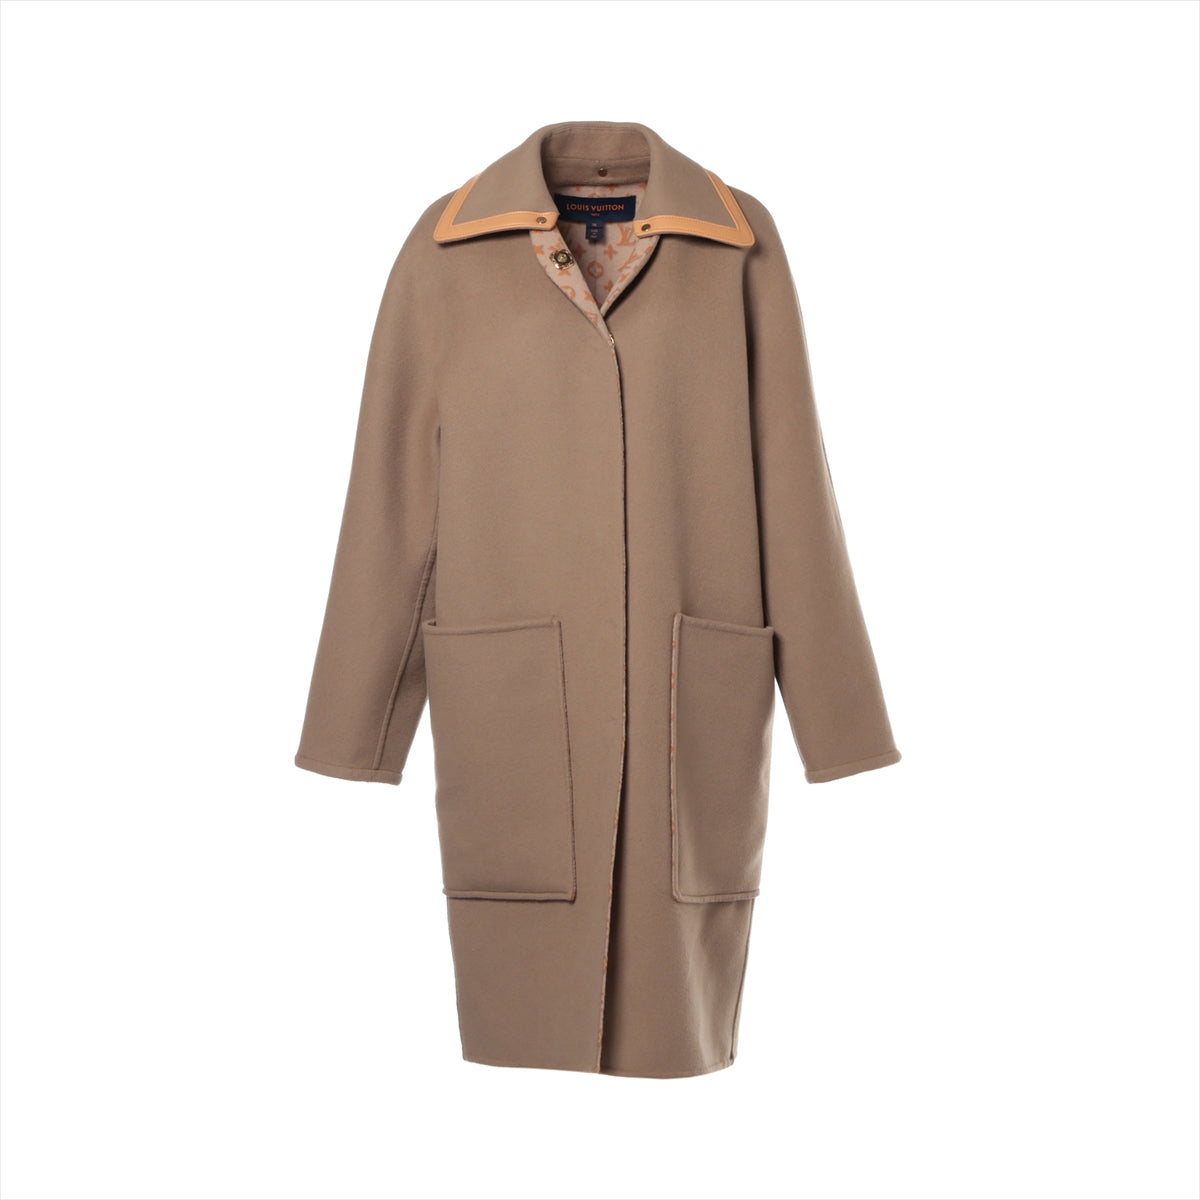 Louis Vuitton 23AW Wool & silk coats 36 Ladies' Brown  removable color double face coat RW232W Removable collar